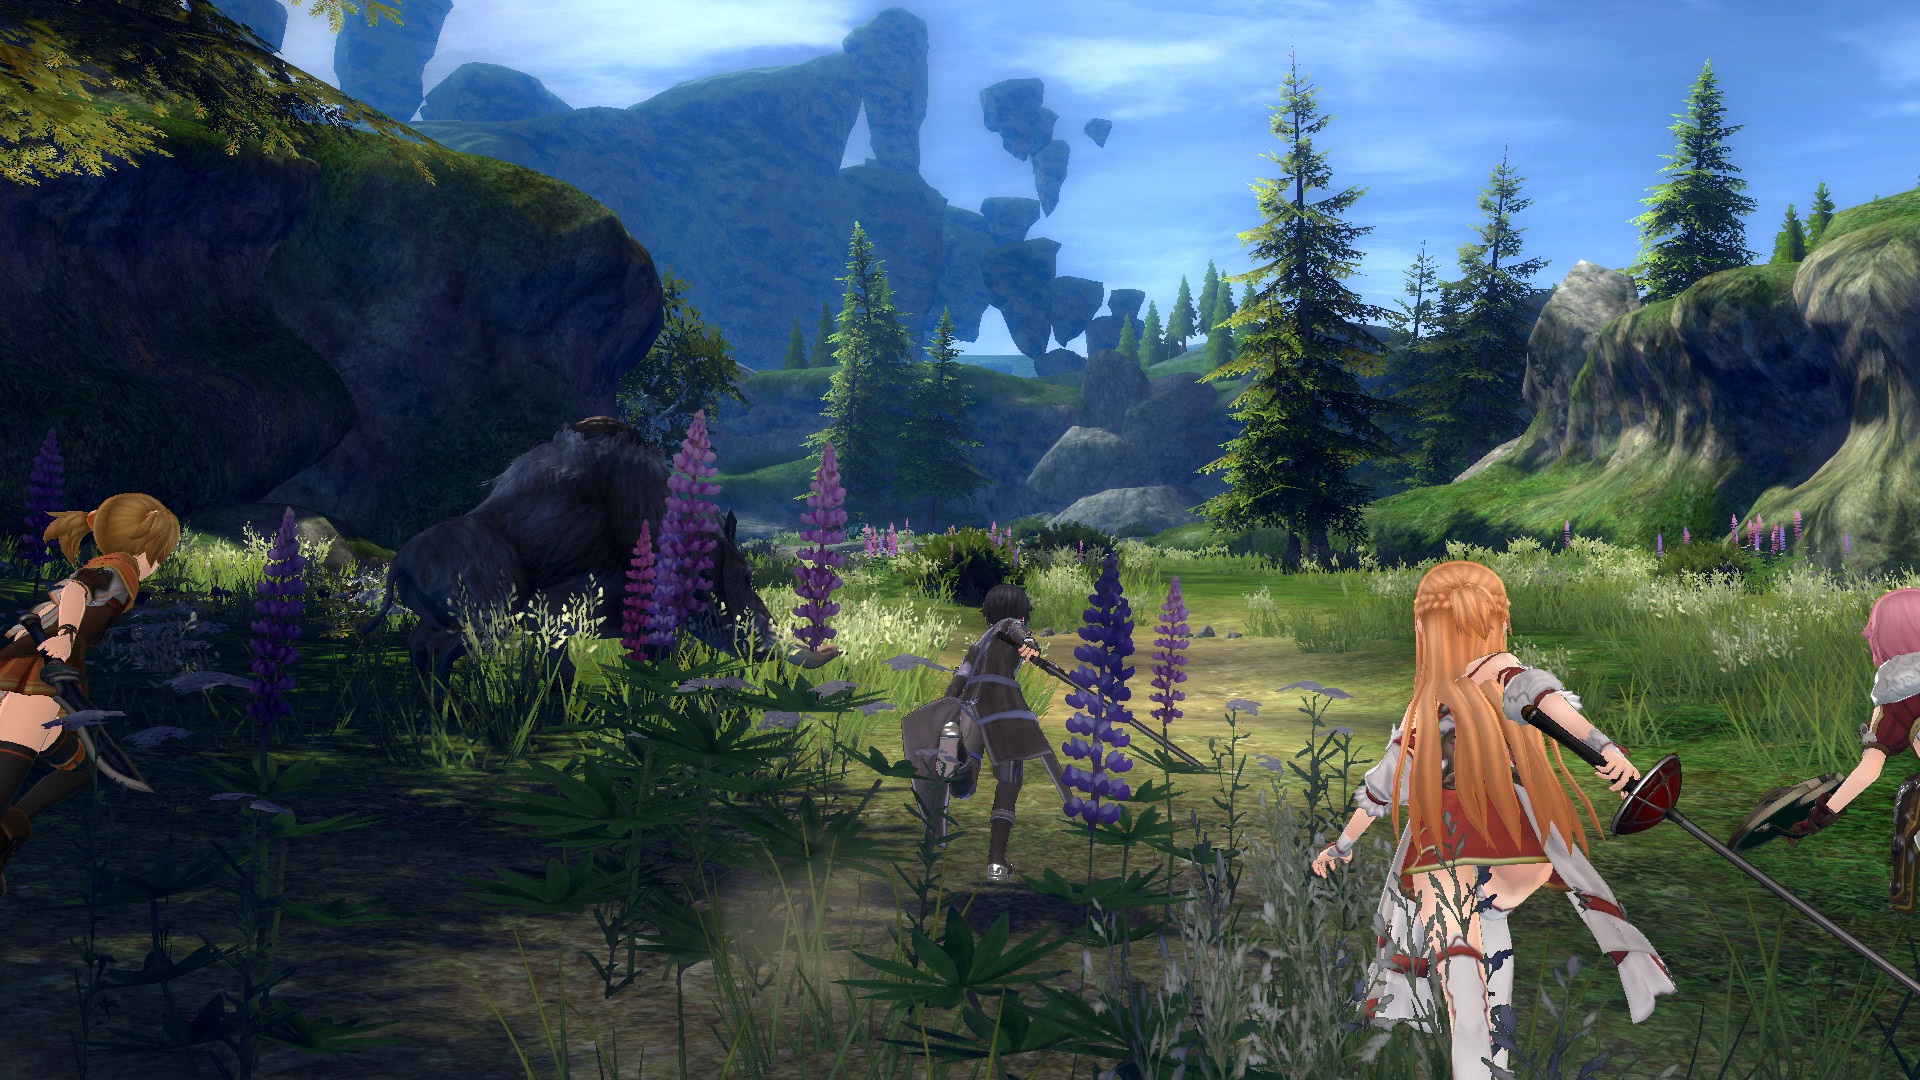 Sword Art Online: Hollow Realization Launches This Fall in Japan, New Trailer